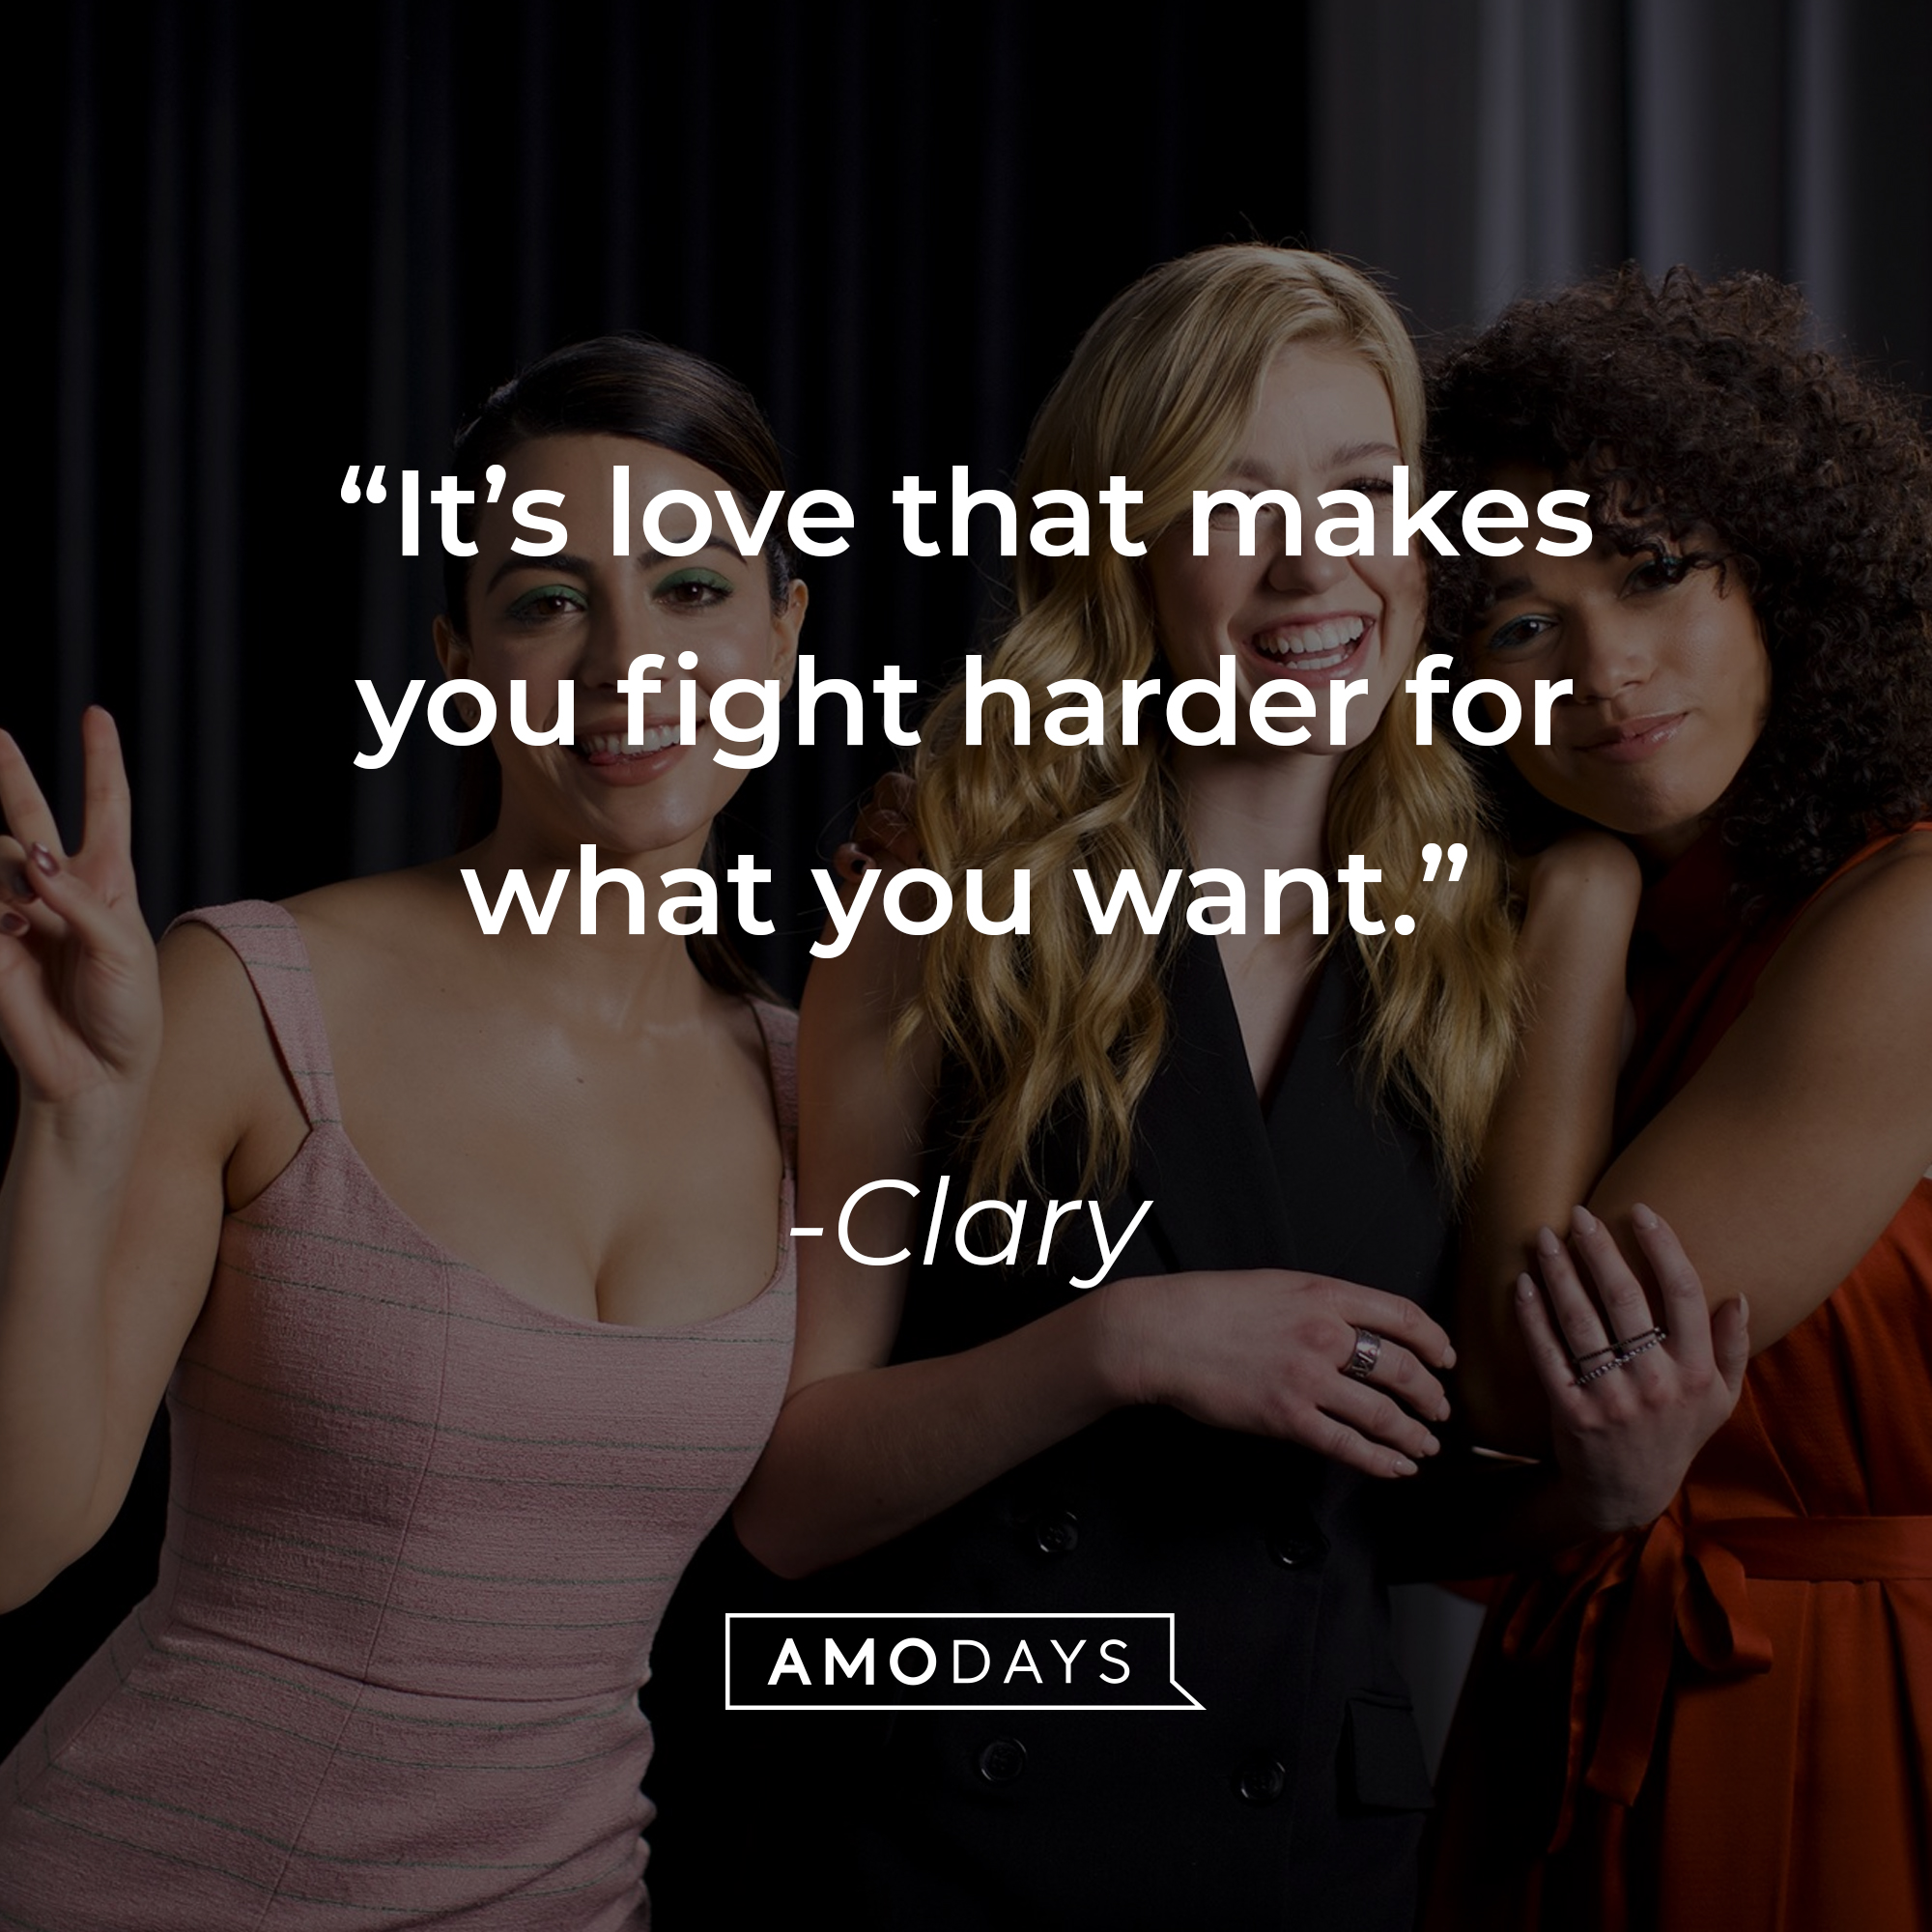 Clary's quote: "It's love that makes you fight harder for what you want."┃Source: facebook.com/ShadowhuntersSeries